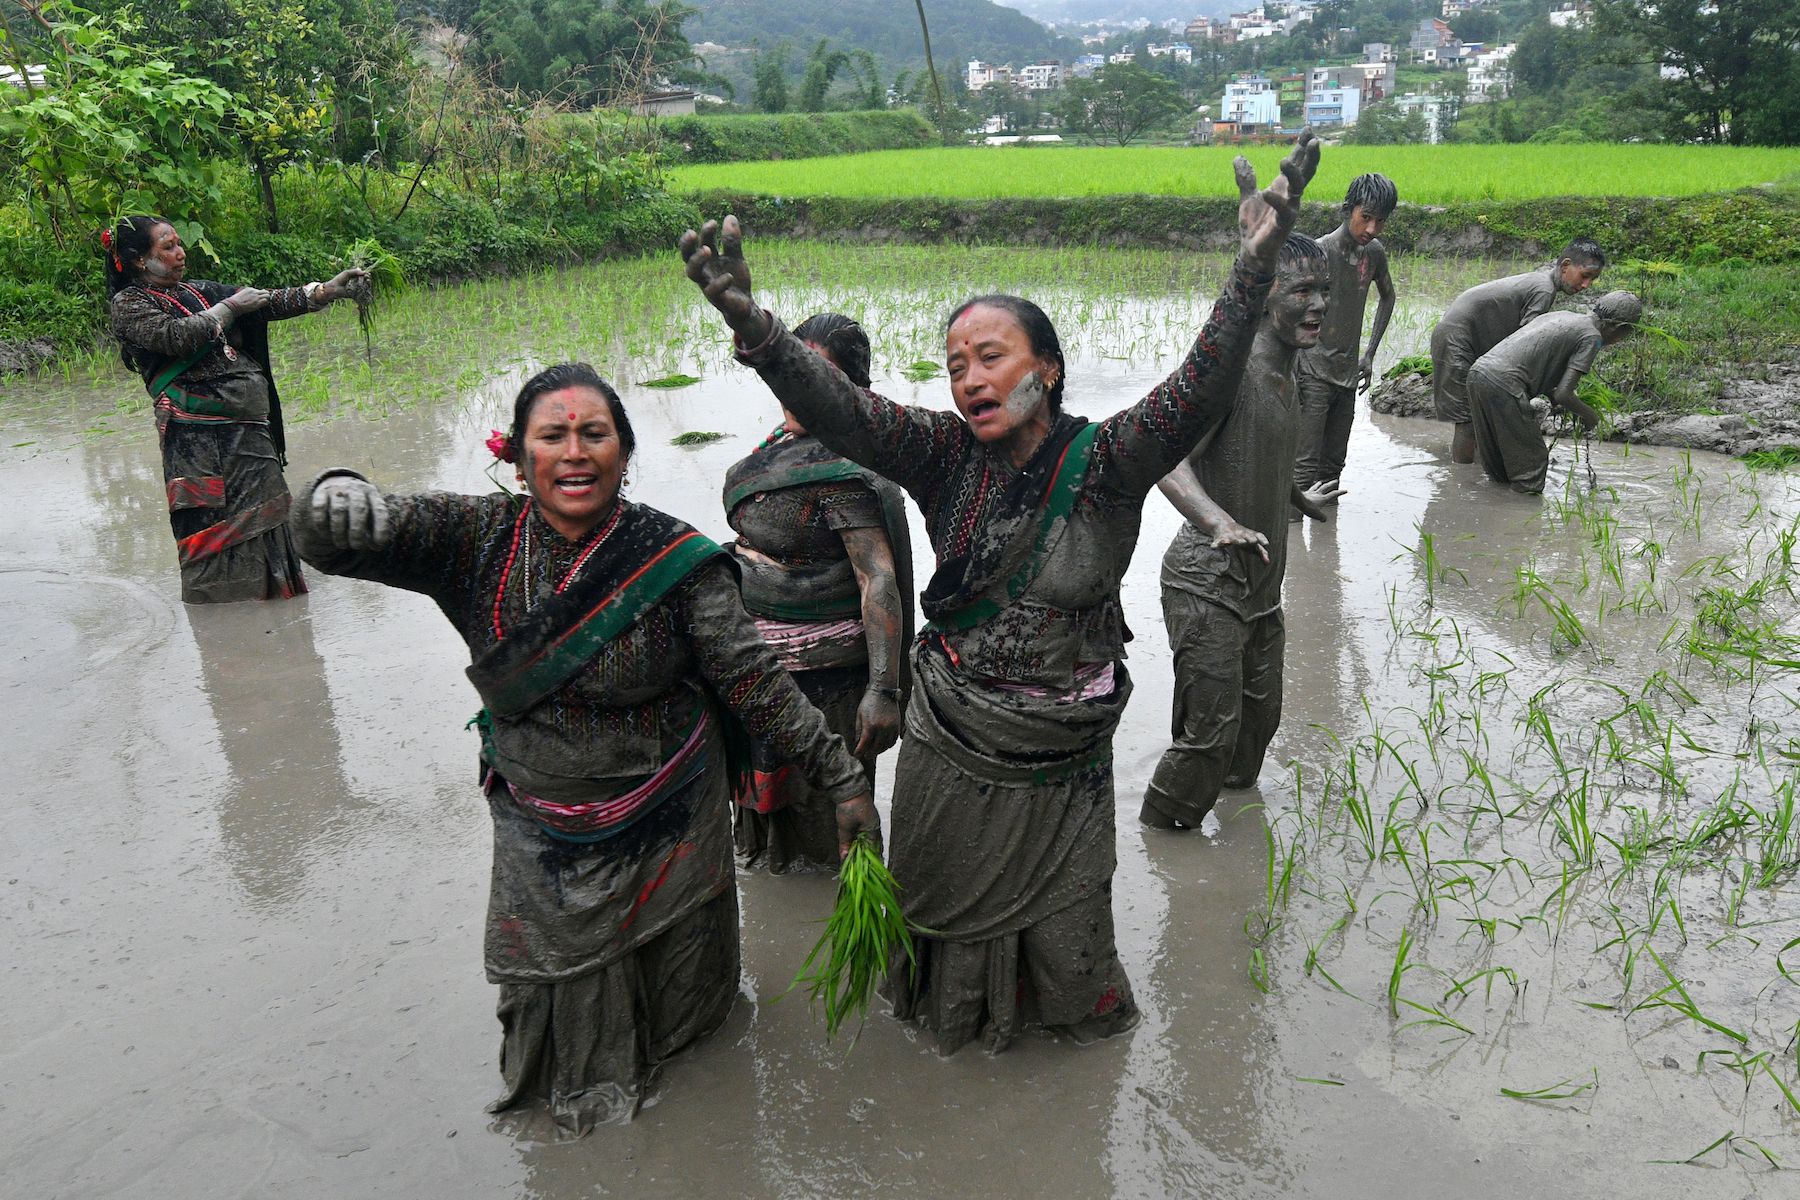 Two women dance in a rice paddy field. They are covered in mud. People in a similar state are seen in the back.